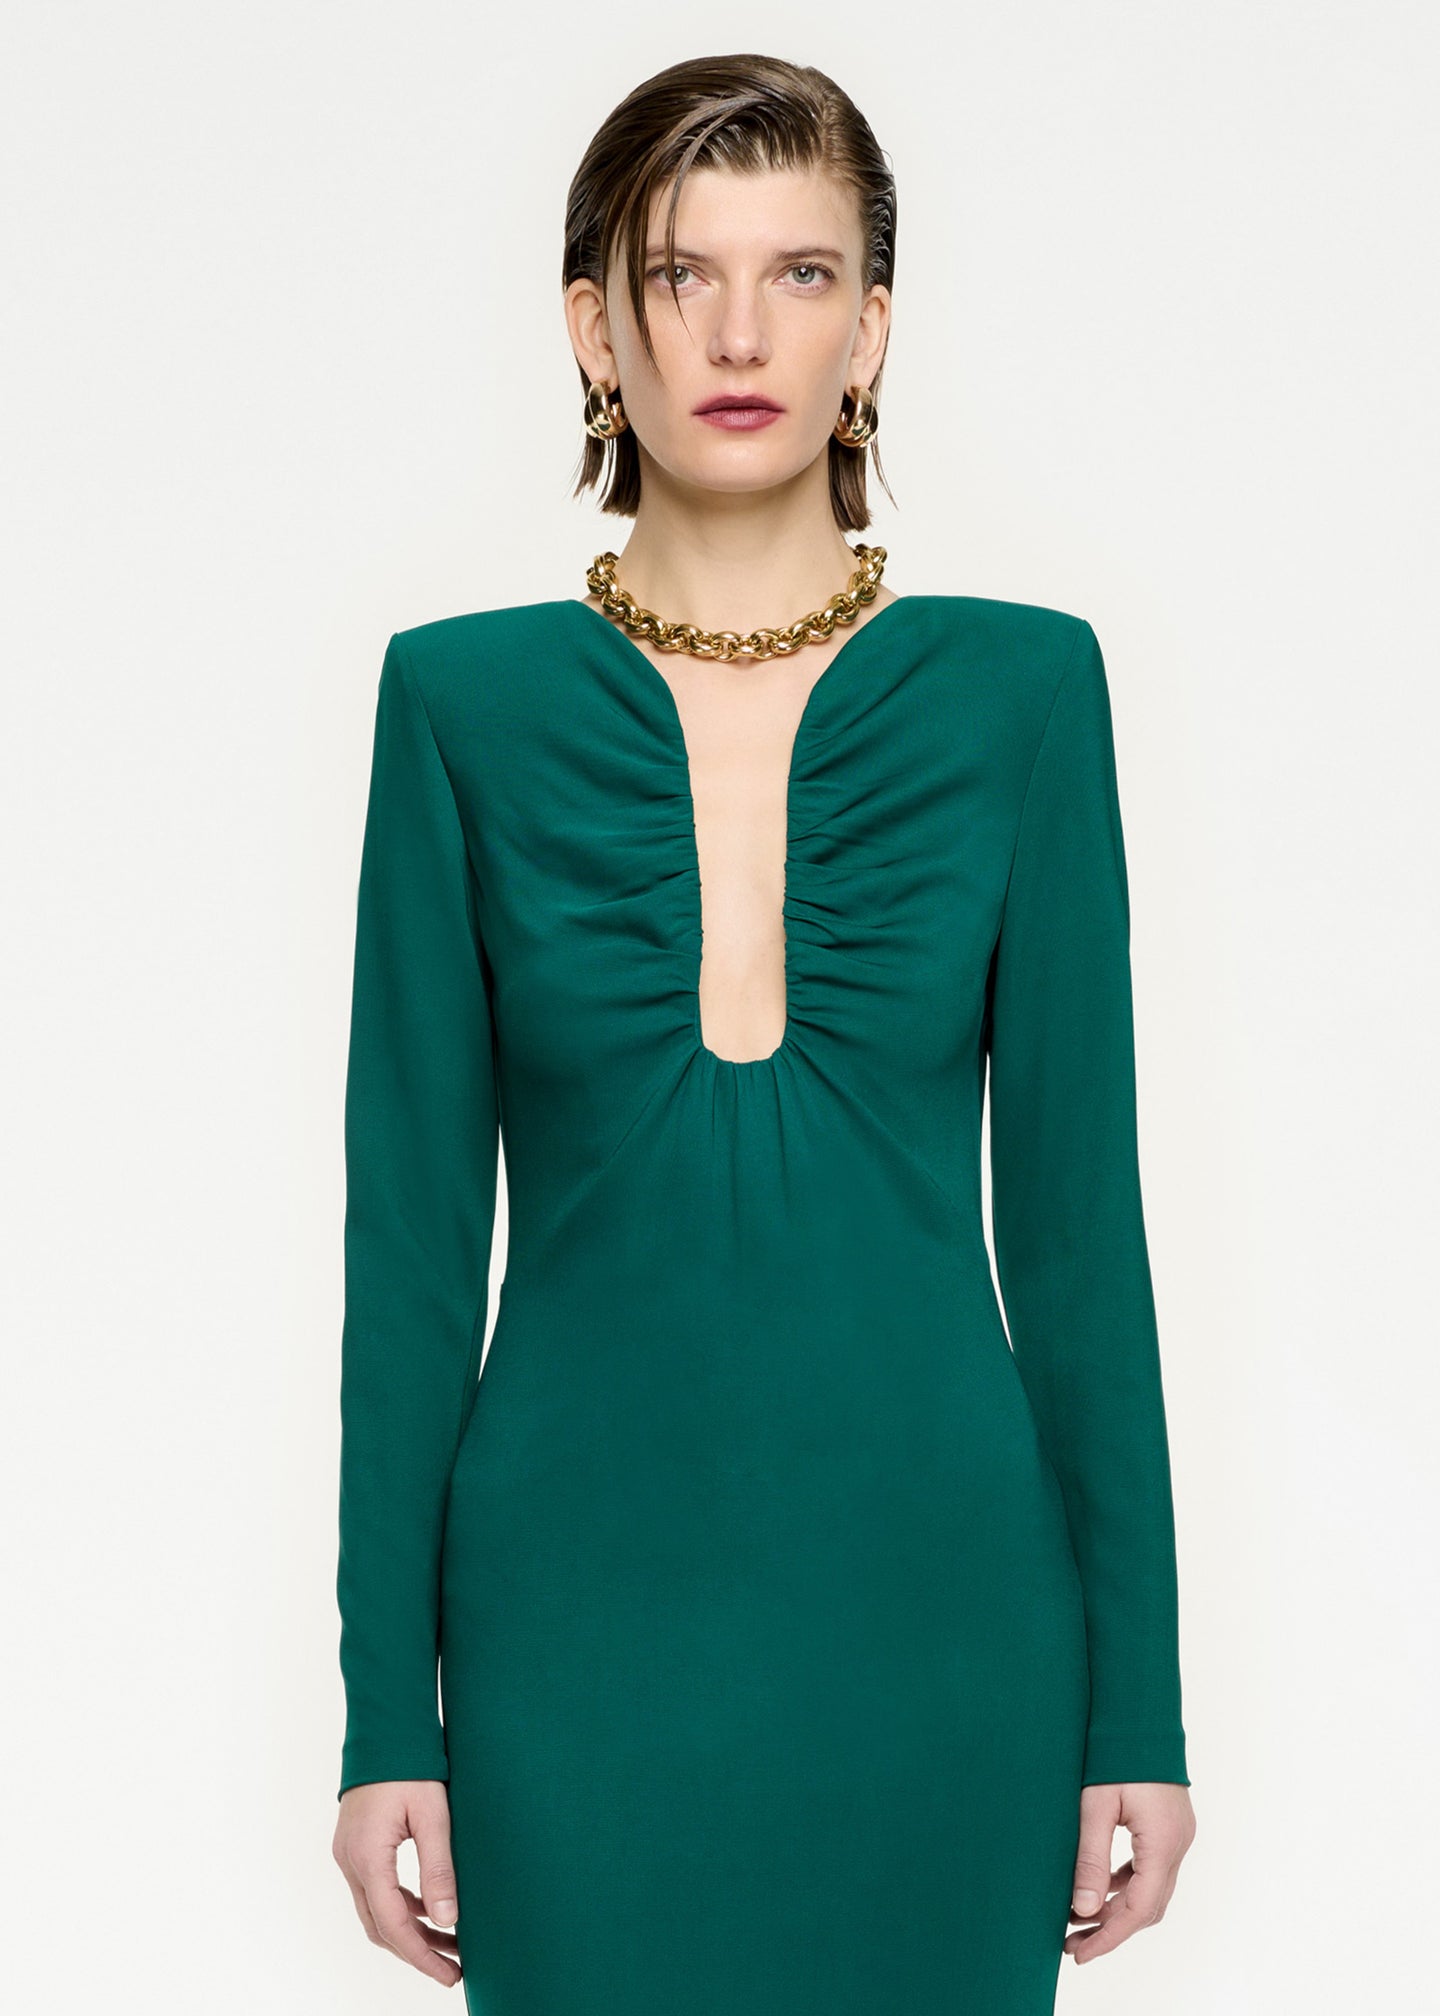 A close up of a woman wearing the Long Sleeve Stretch Cady Maxi Dress in Green